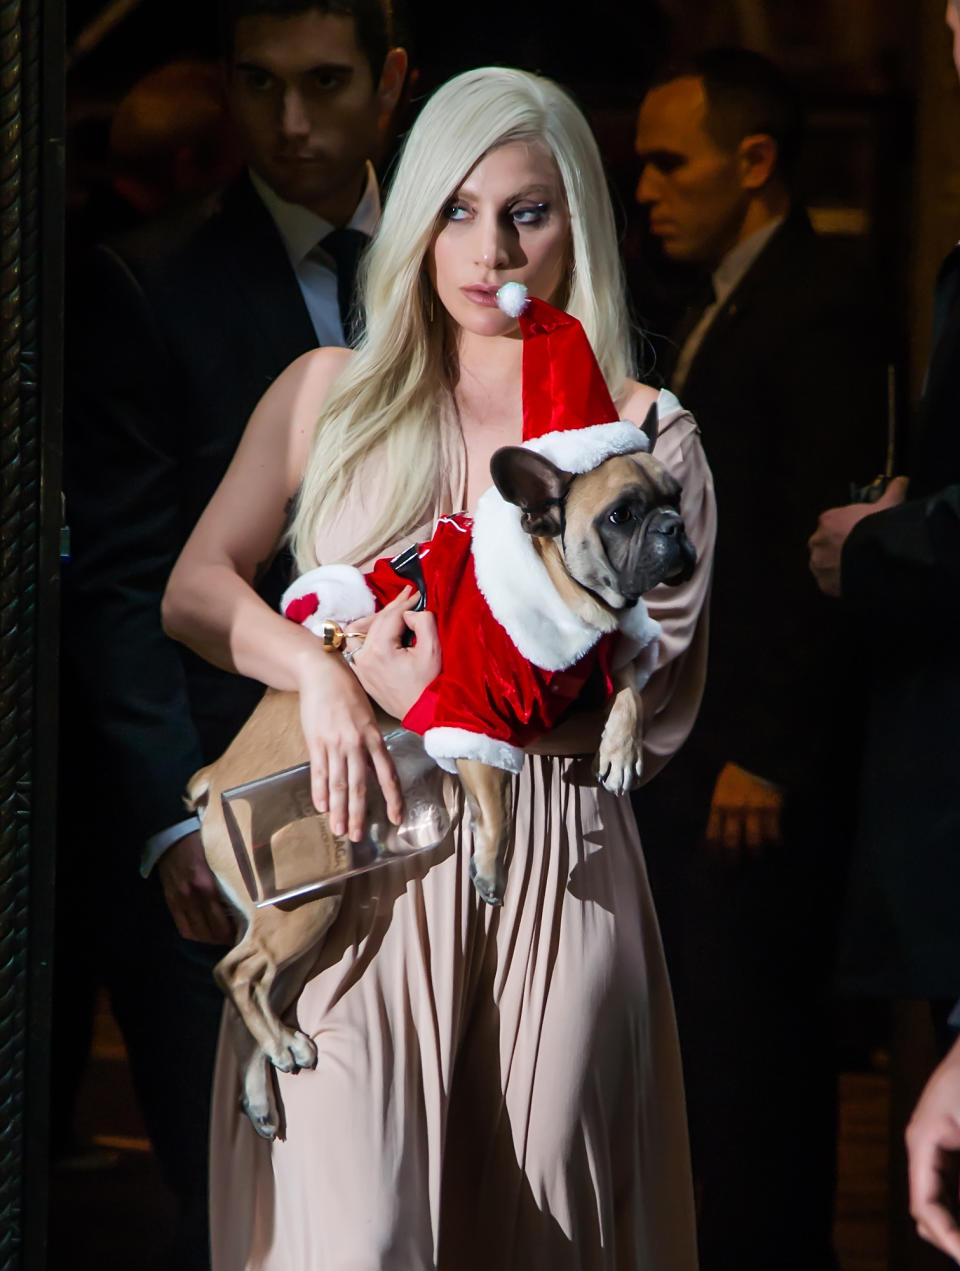 NEW YORK, NY - DECEMBER 11:  Singer-songwriter Lady Gaga and her dog Stella attend Billboard's 10th Annual Women In Music  at Cipriani 42nd Street on December 11, 2015 in New York City.  (Photo by Gilbert Carrasquillo/FilmMagic)